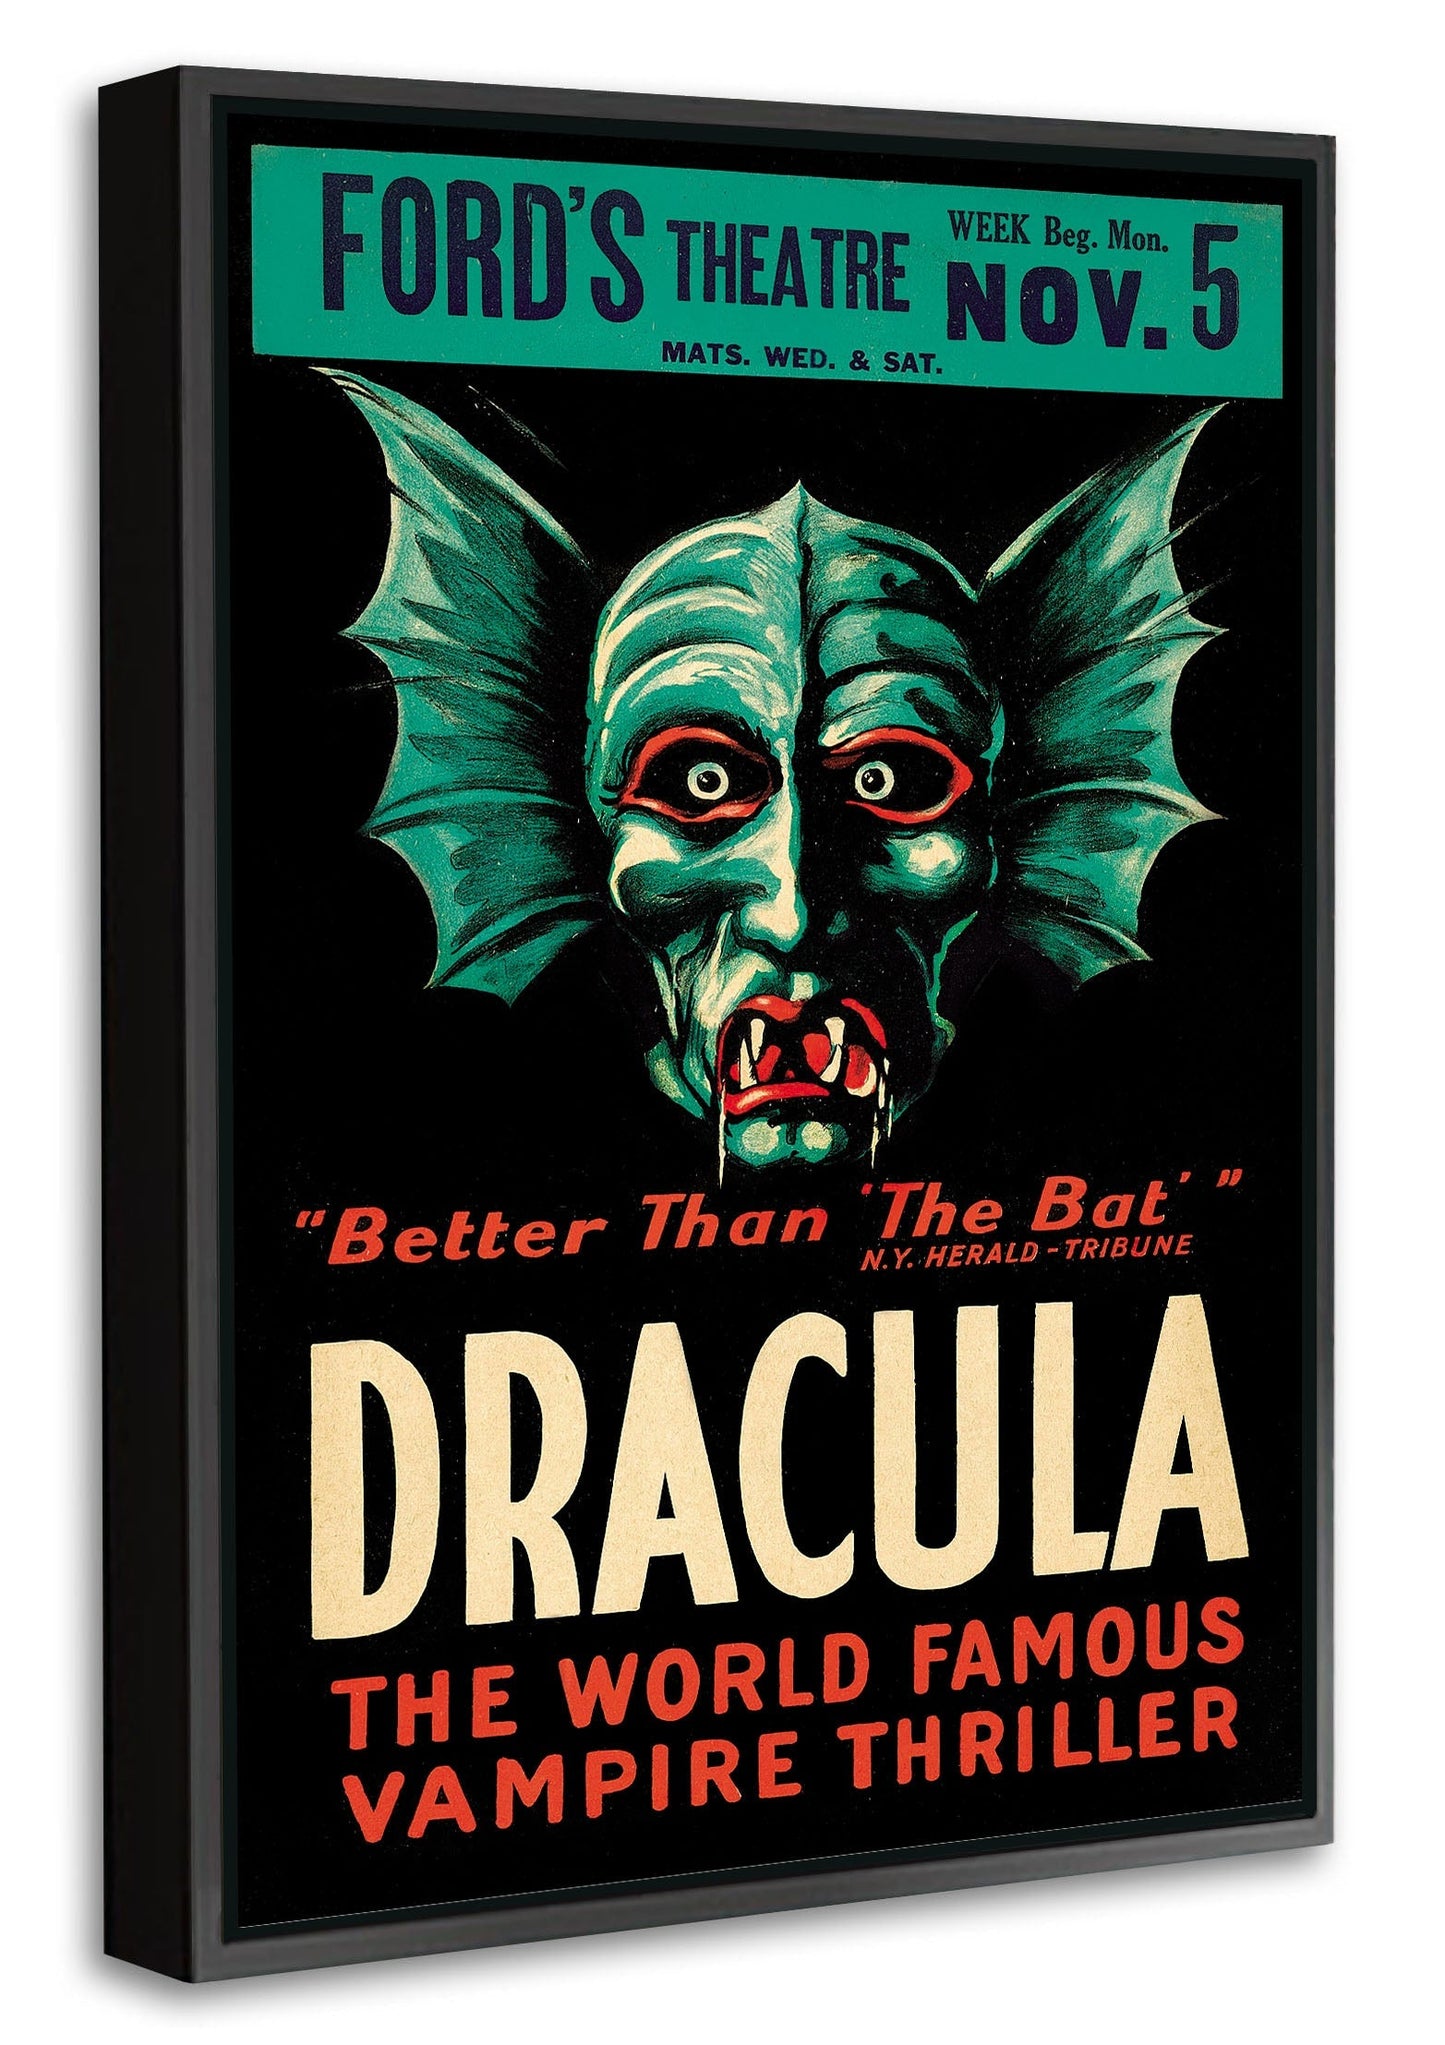 Dracula Ford Theatre-movies, print-Canvas Print with Box Frame-40 x 60 cm-BLUE SHAKER